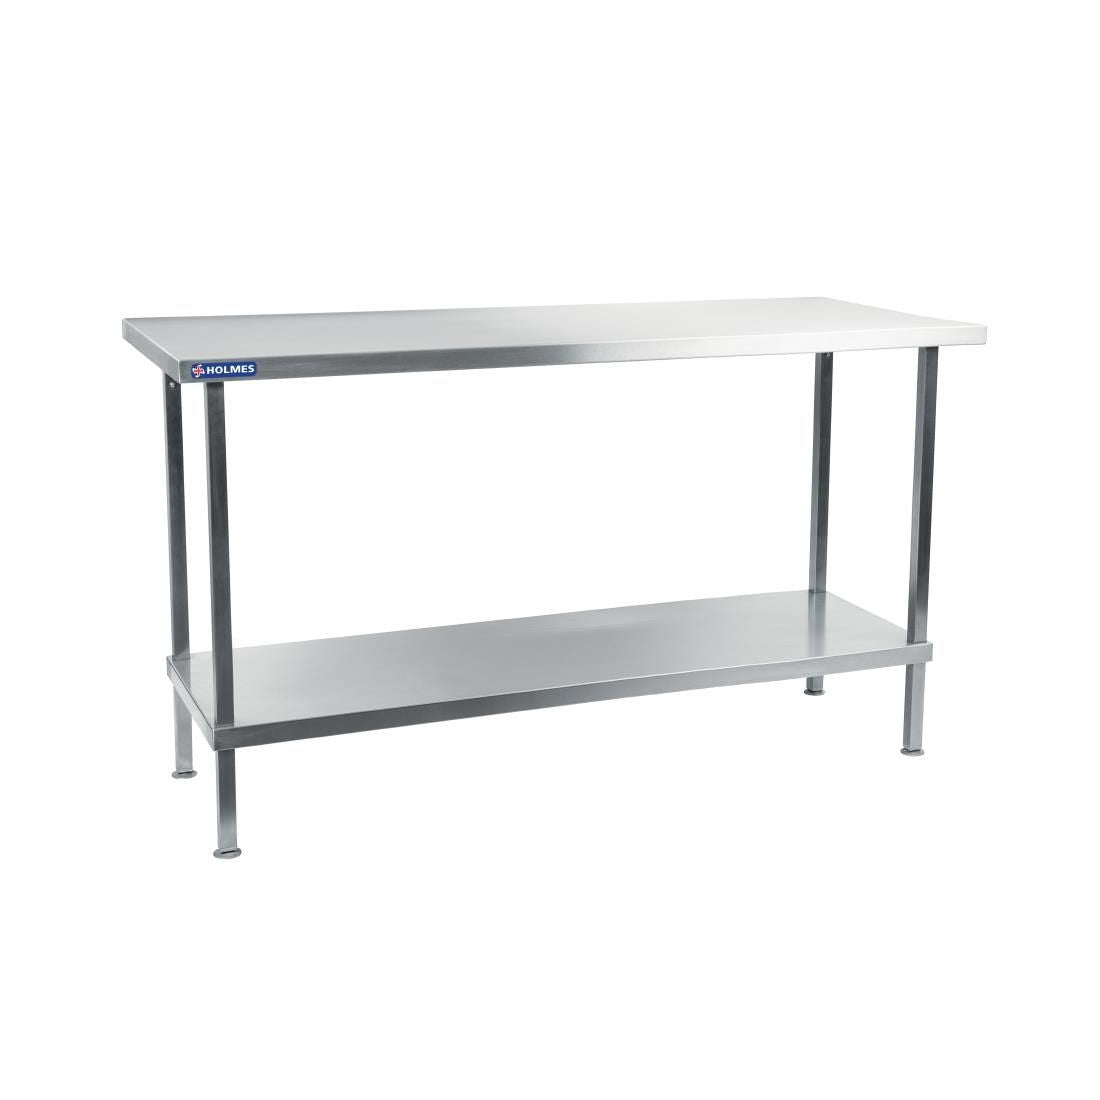 Holmes Self Assembly Stainless Steel Centre Table 900mm - DR348